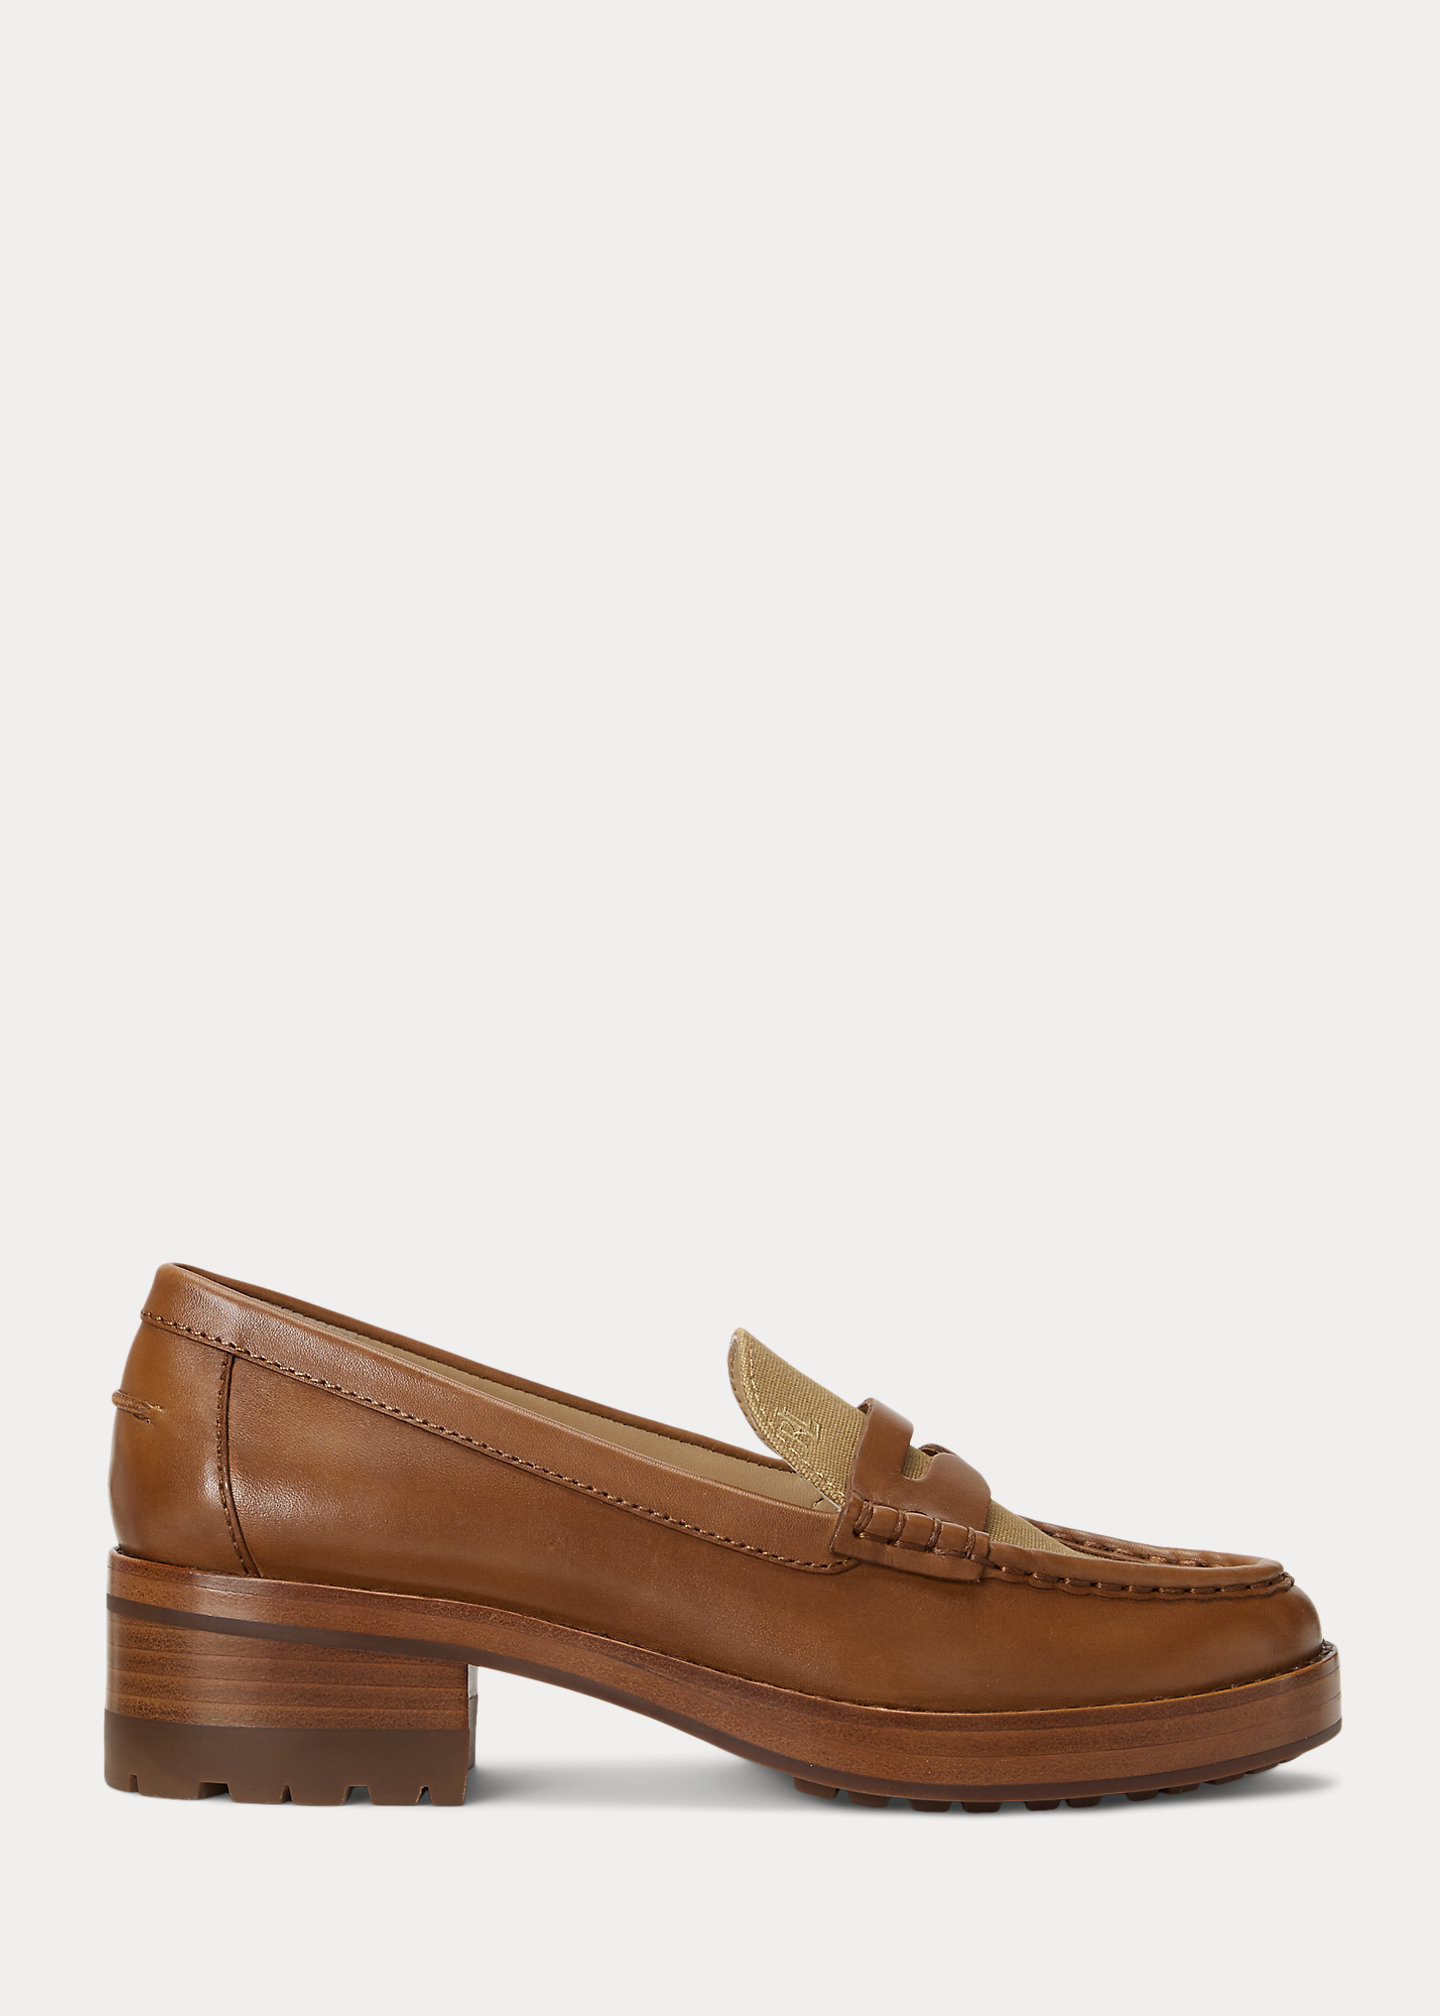 Wren Leather & Canvas Penny Loafer